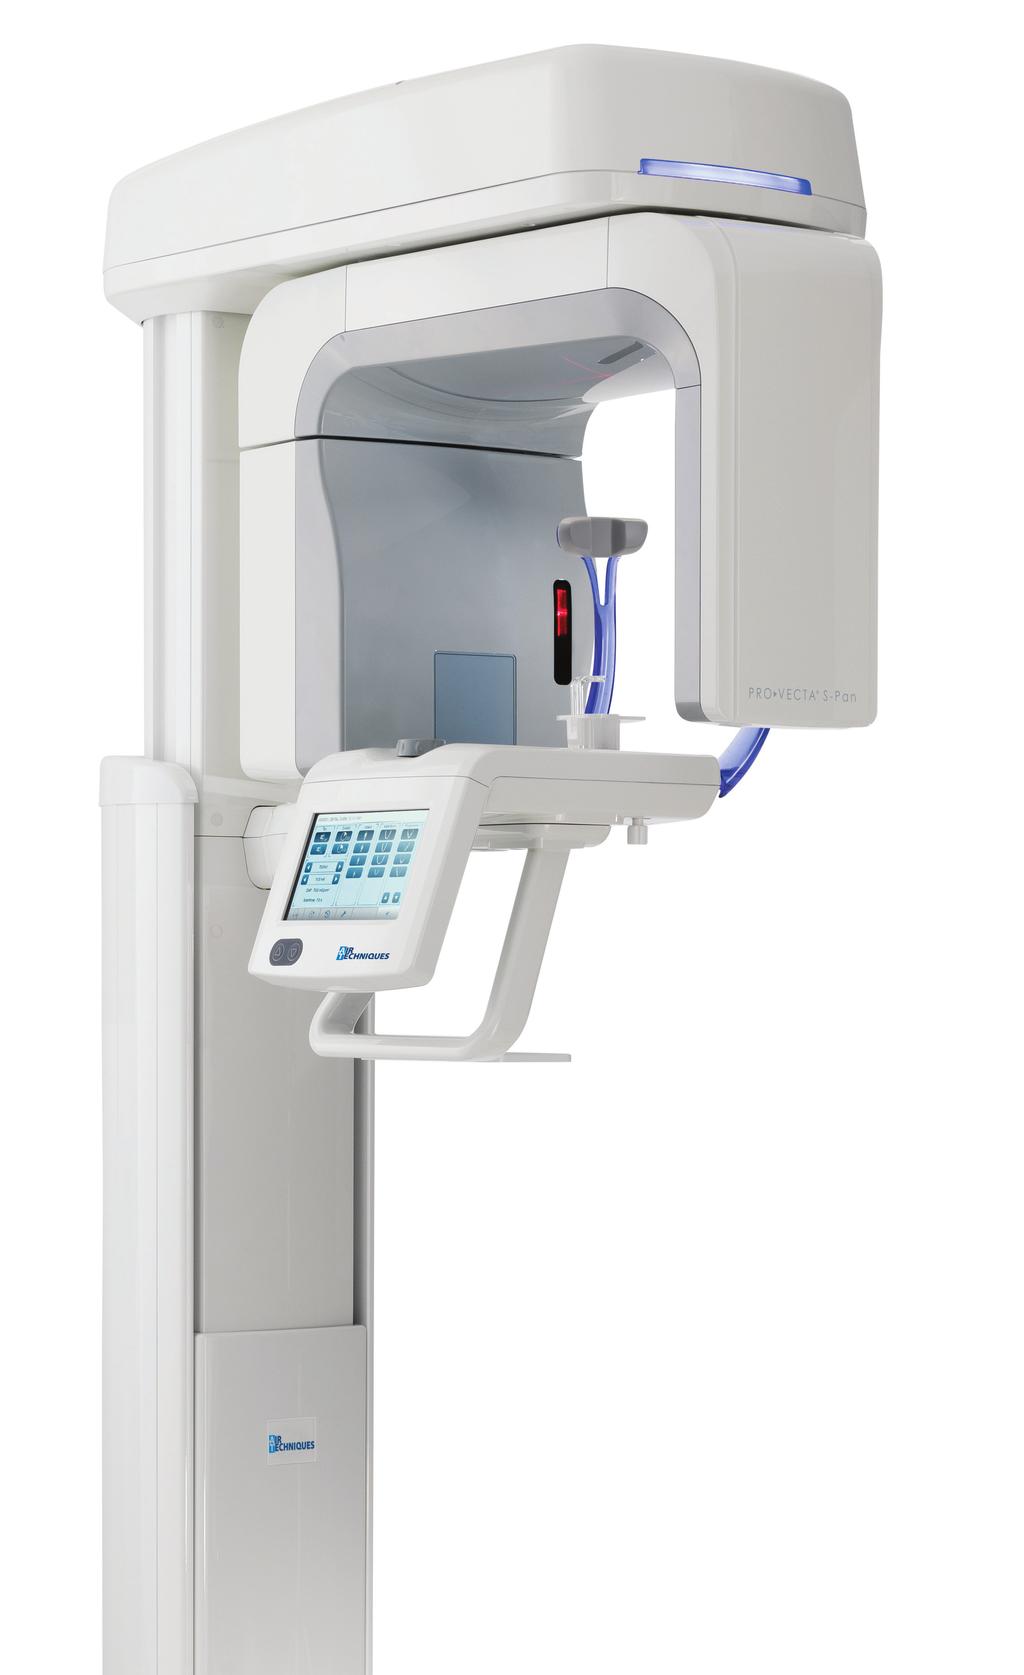 ProVecta S-Pan truly perfect imaging High-speed scanning with low X-ray dose All functions at your fingertips The innovative 7 touchscreen allows access to all functions of the S-Pan while